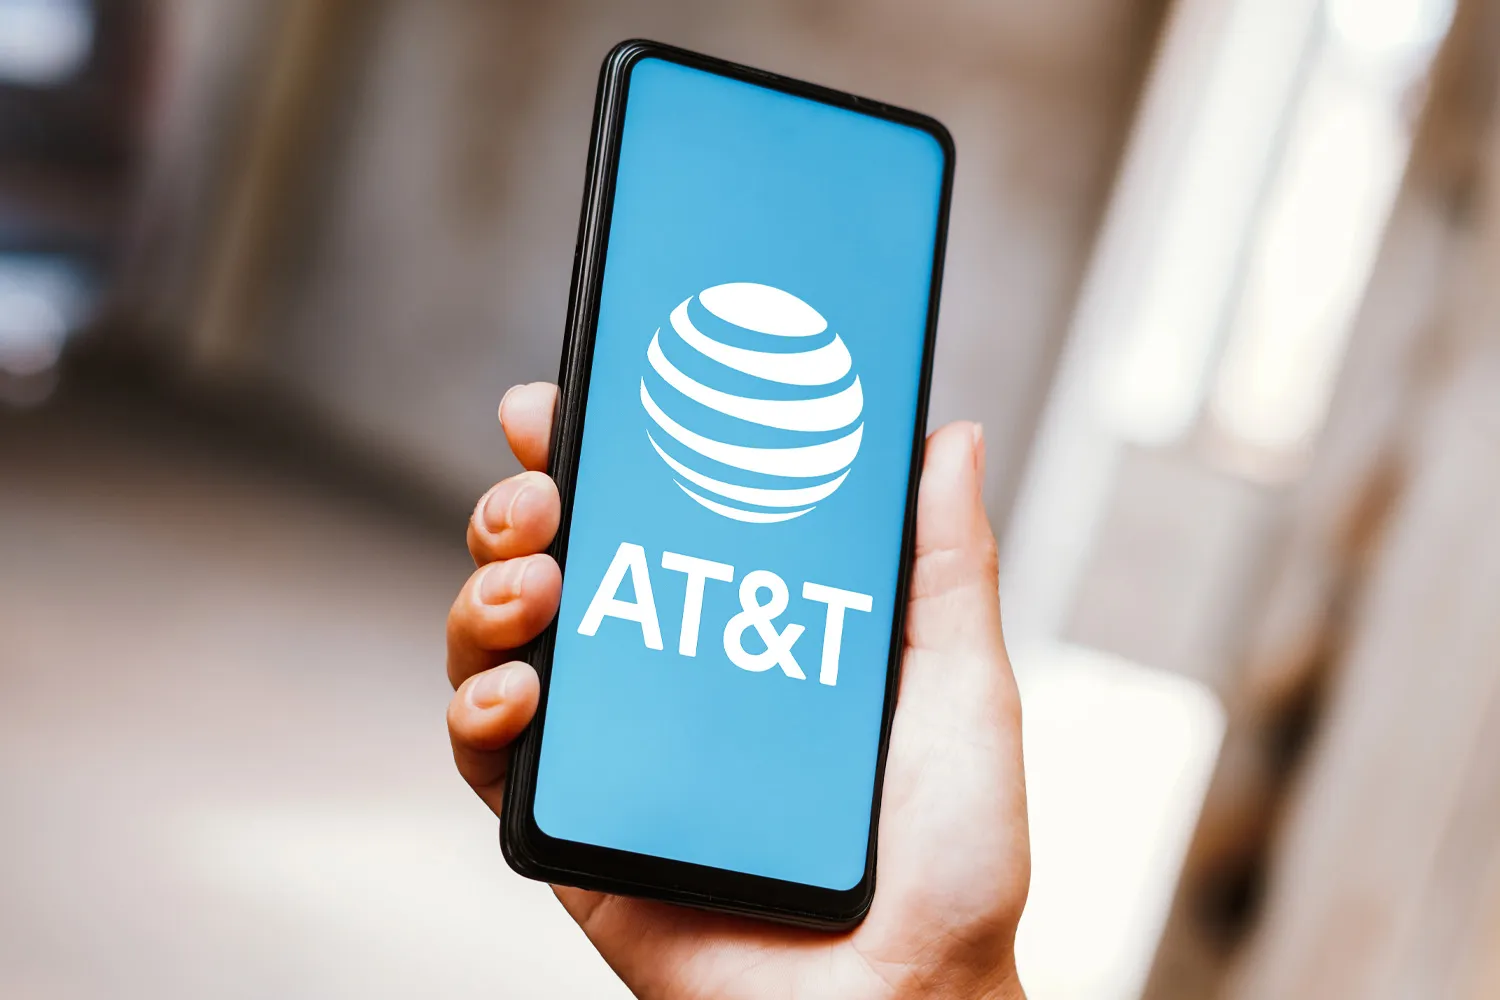 Almost 200 Million Customers of AT&T in a Dilemma as Plan Price Hikes with Bigger Hotspot Benefits